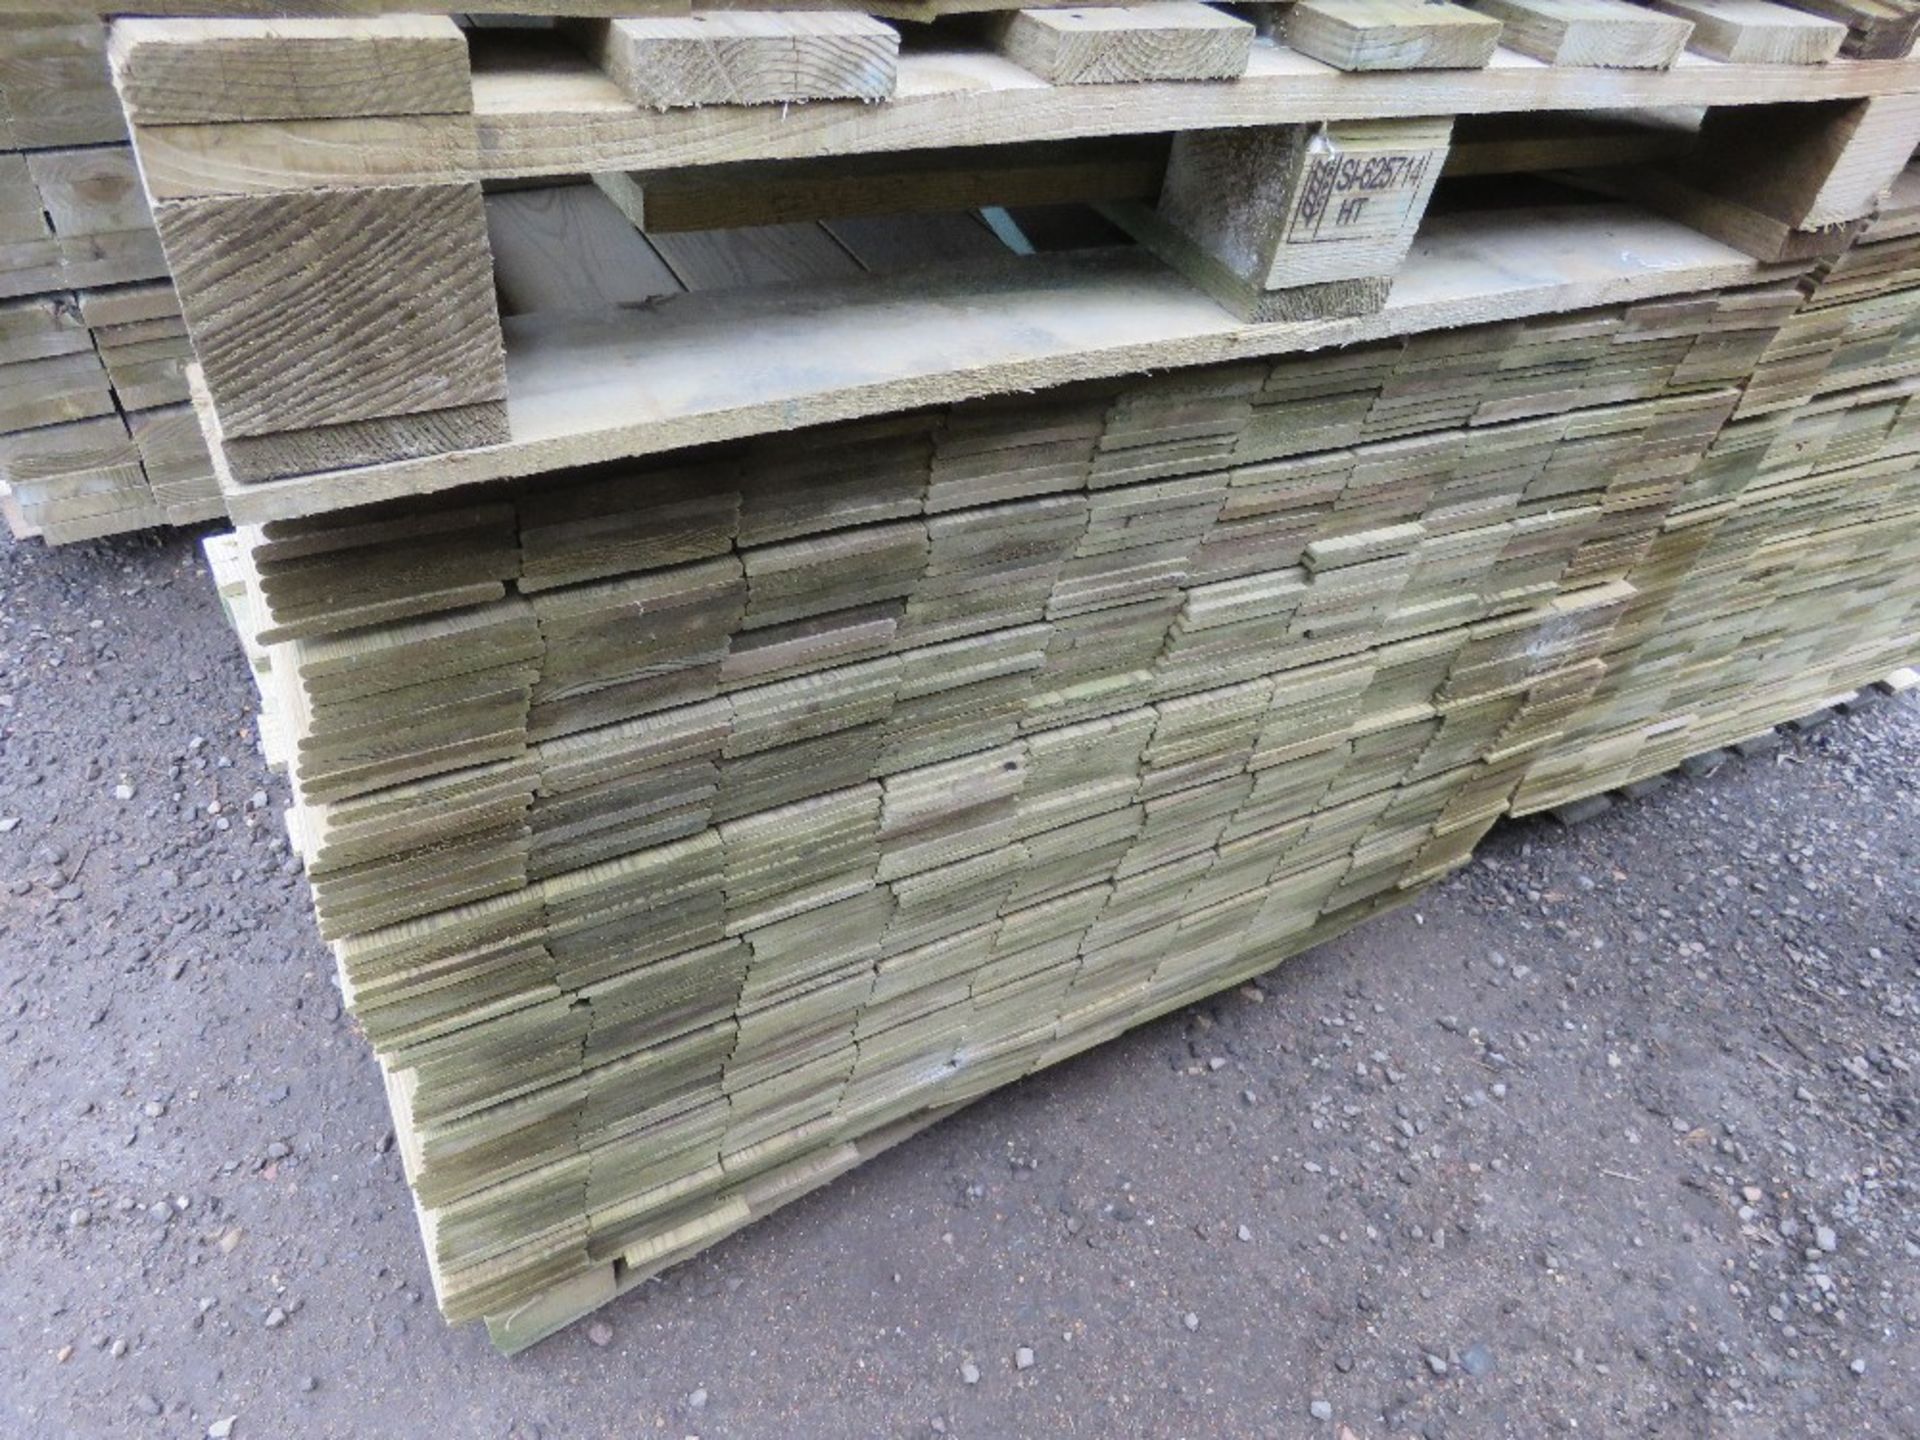 2 X PALLETS OF TREATED HIT AND MISS FENCE CLADDING BOARDS 1.04M LENGTH X 100MM WIDTH APPROX. - Image 3 of 4